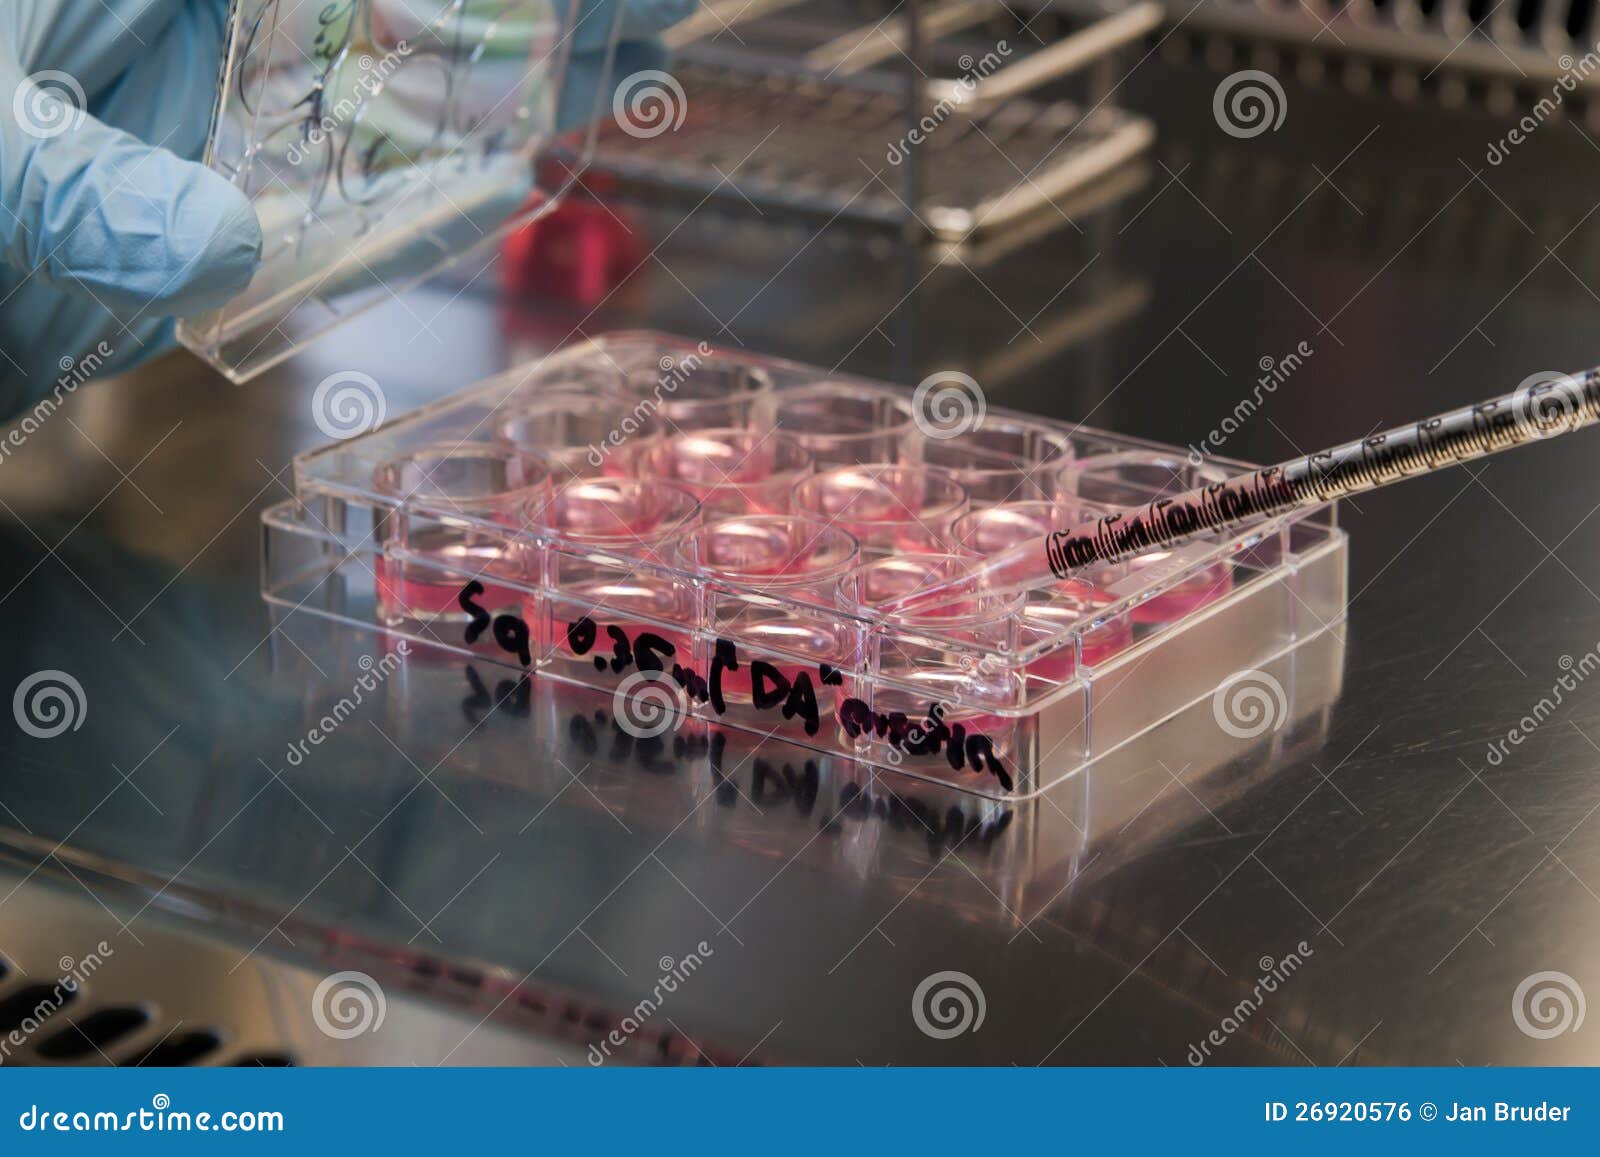 stem cell culture in a laboratory